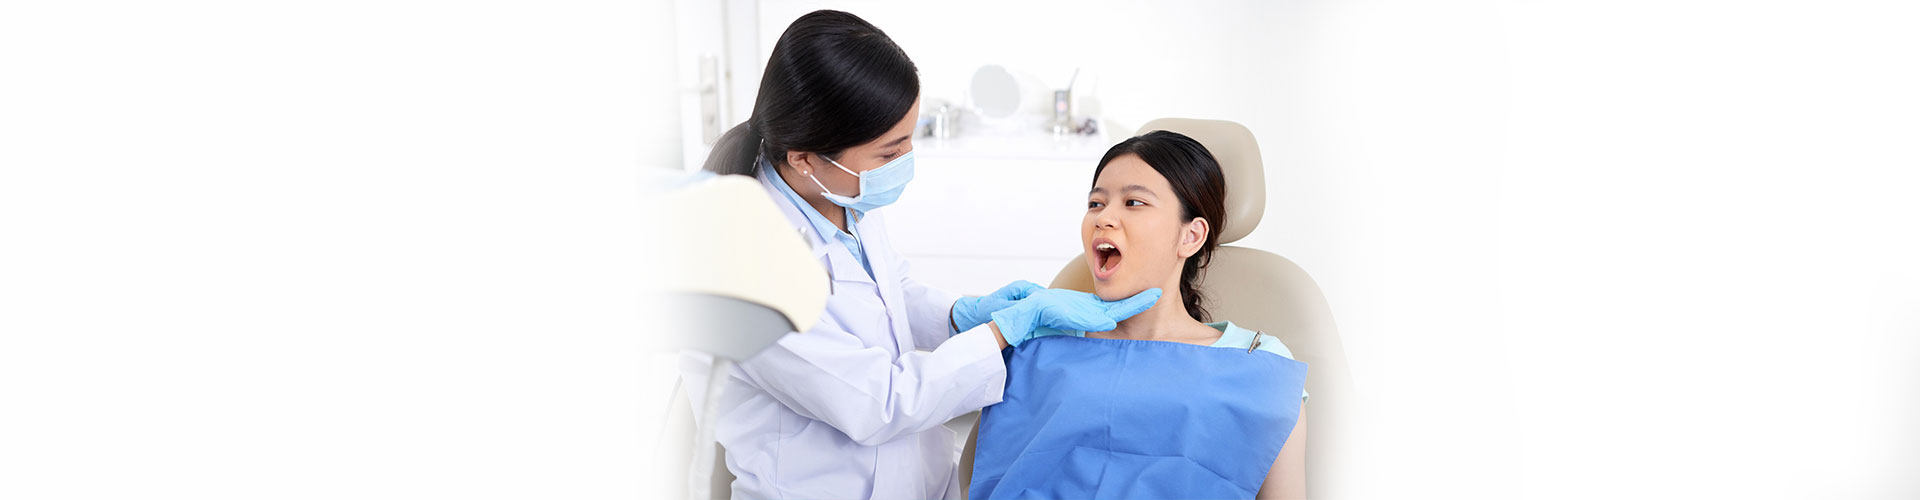 What to Expect During a Dental Exam: A Step-by-Step Overview